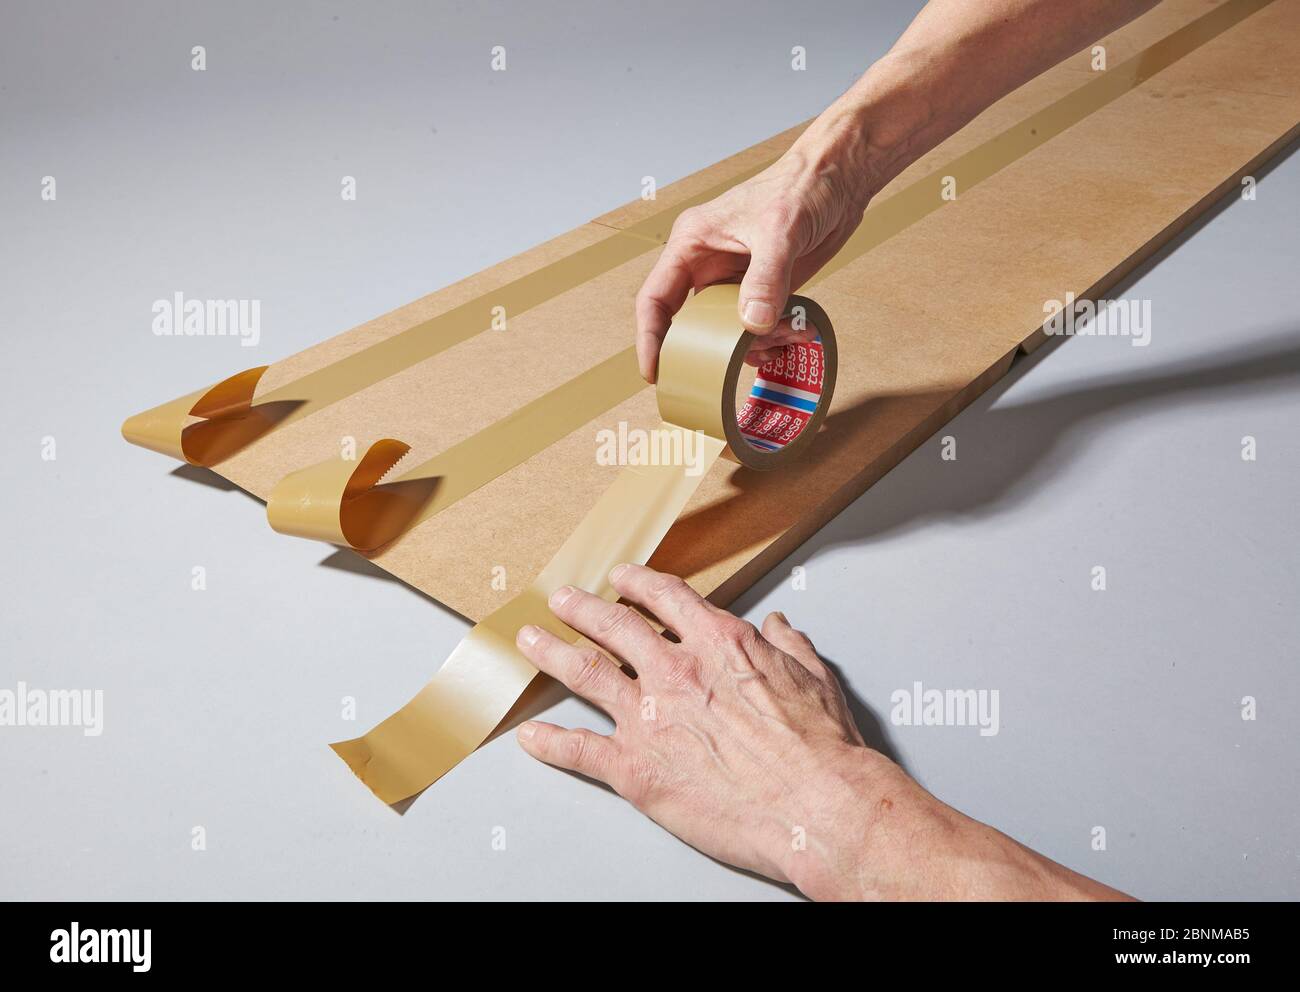 Construction of a shelf made of wood, Euro pallet, solid wood, MDF board; Do-it-yourself production, step-by-step, step 8b, put MDF boards together and connect with tape or parcel tape Stock Photo